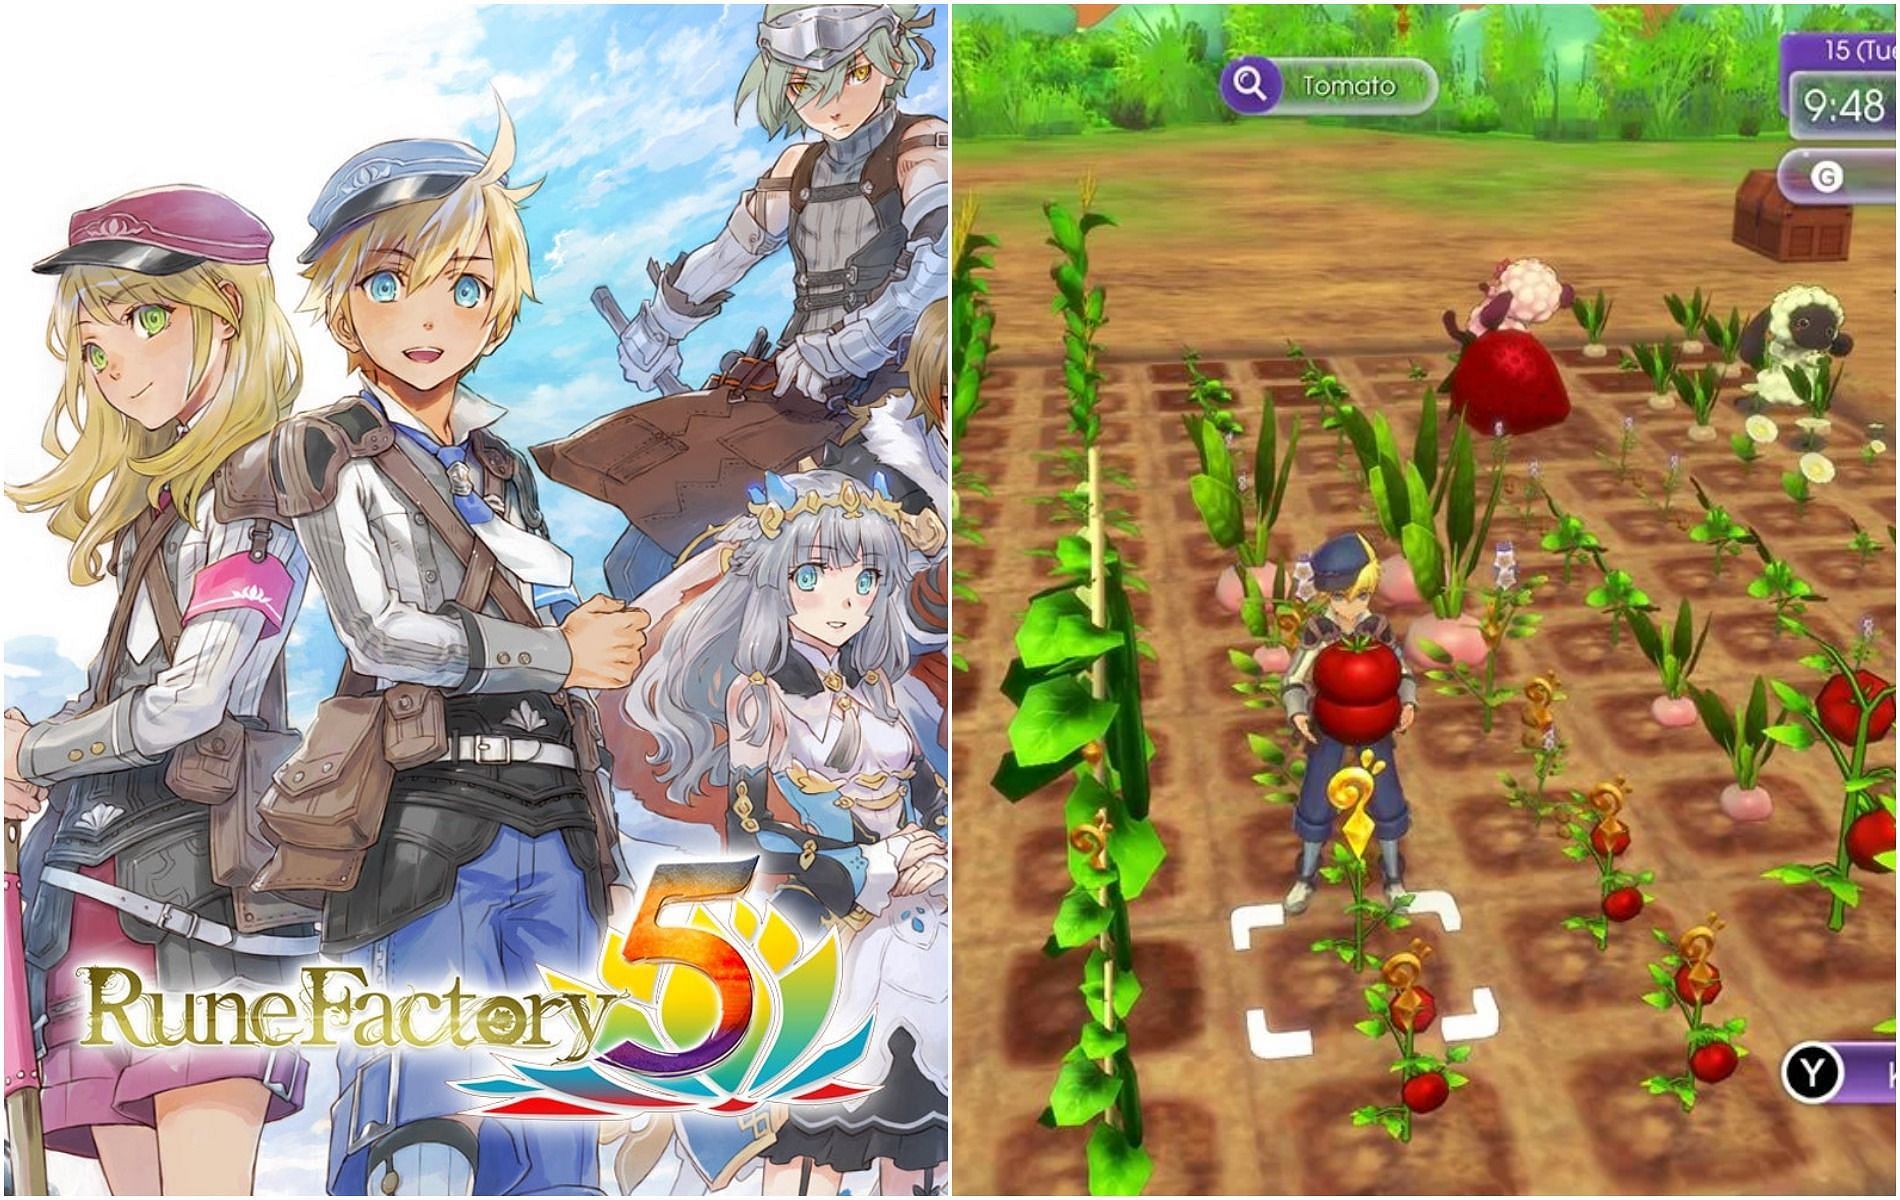 Farming Tools in Rune Factory 5 (Images by Xseed Games)